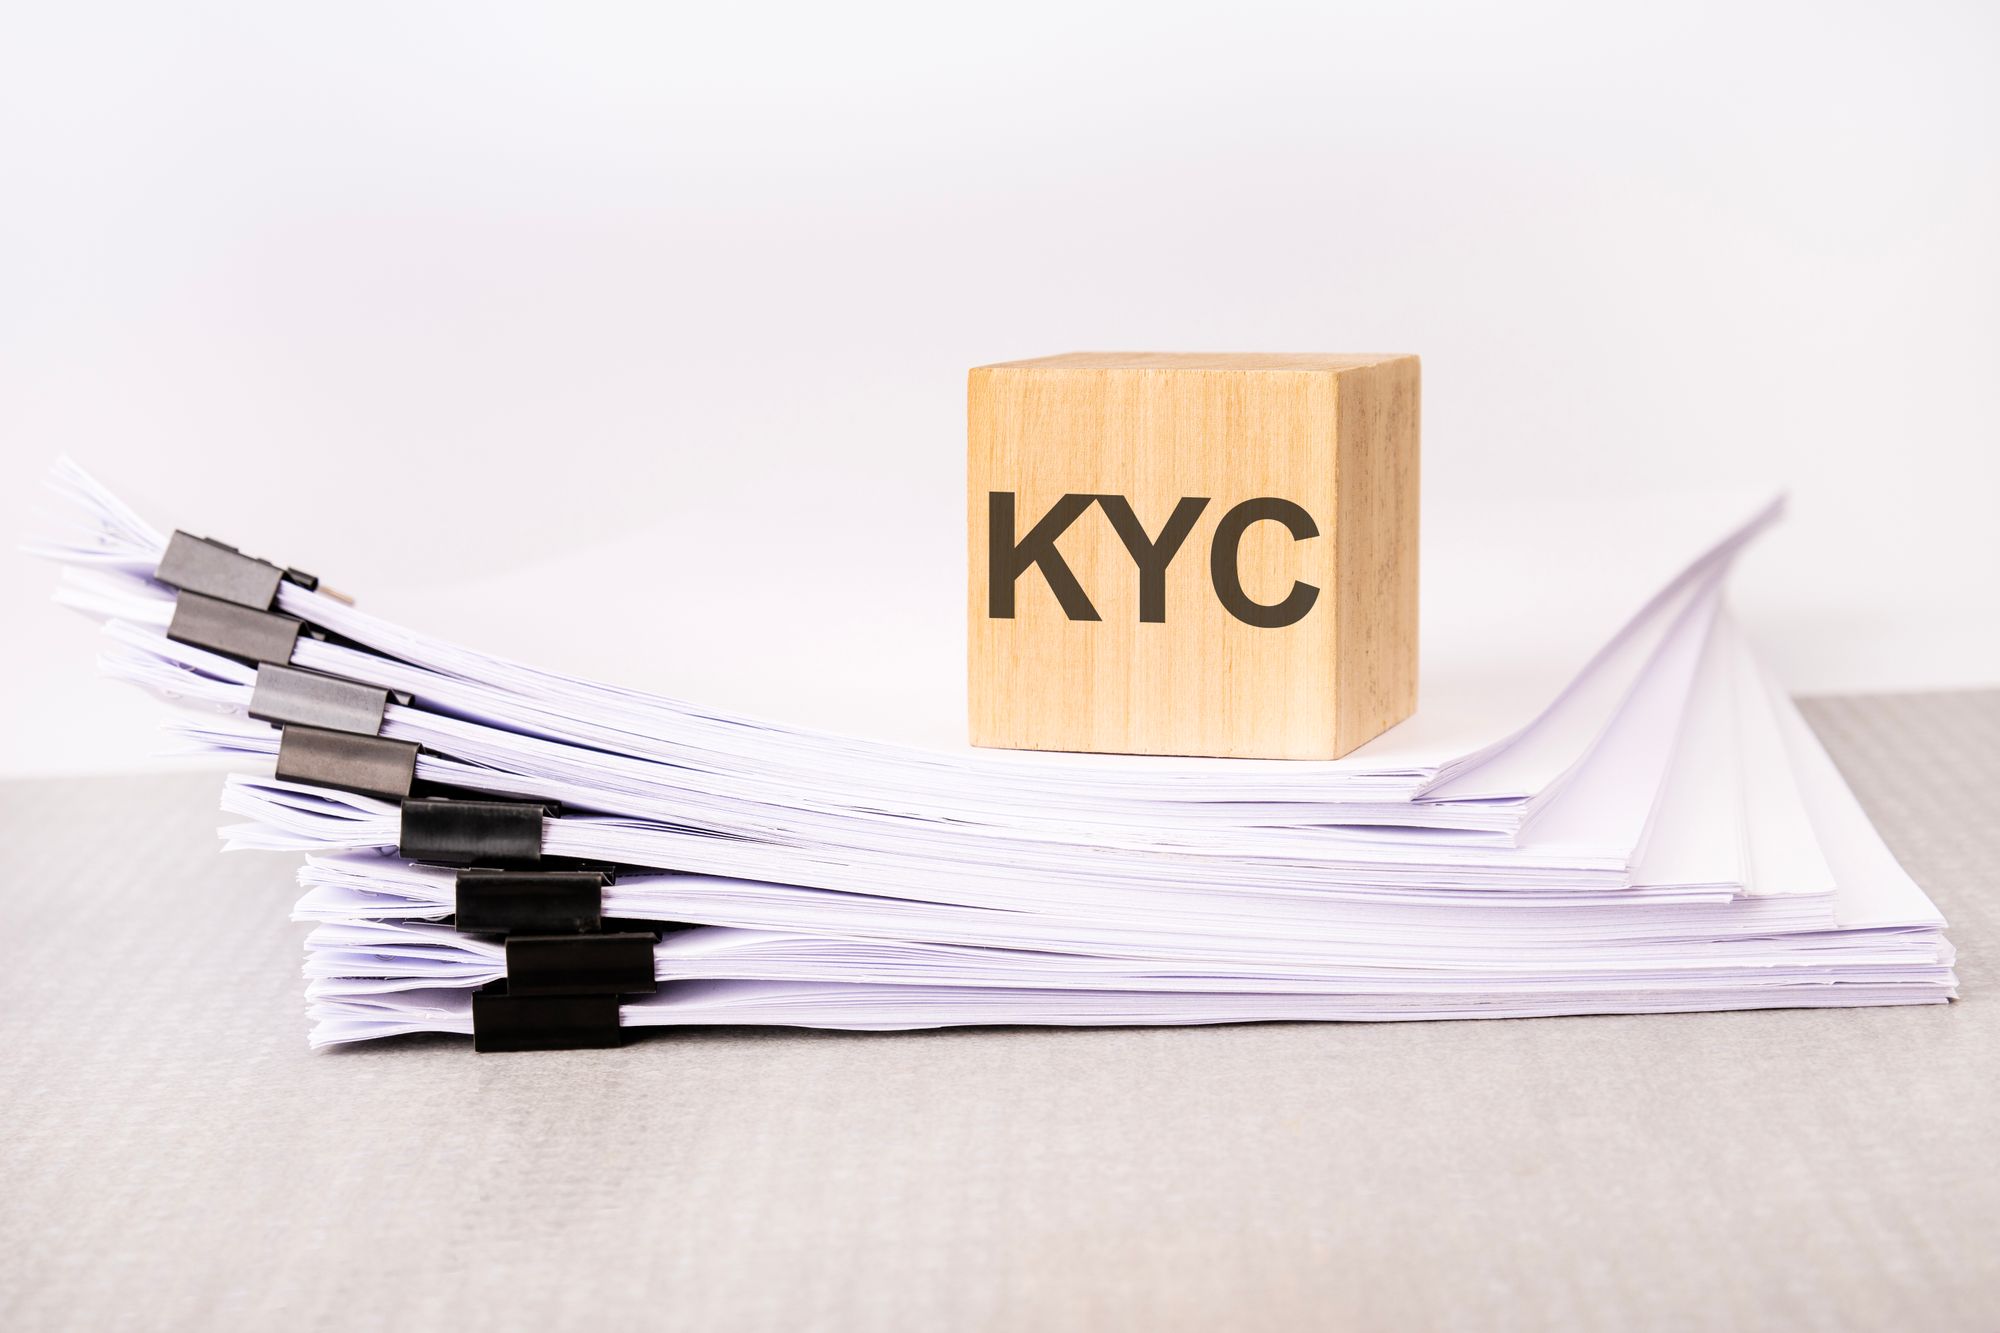 Bitget Aims for More Security With Level 1 KYC